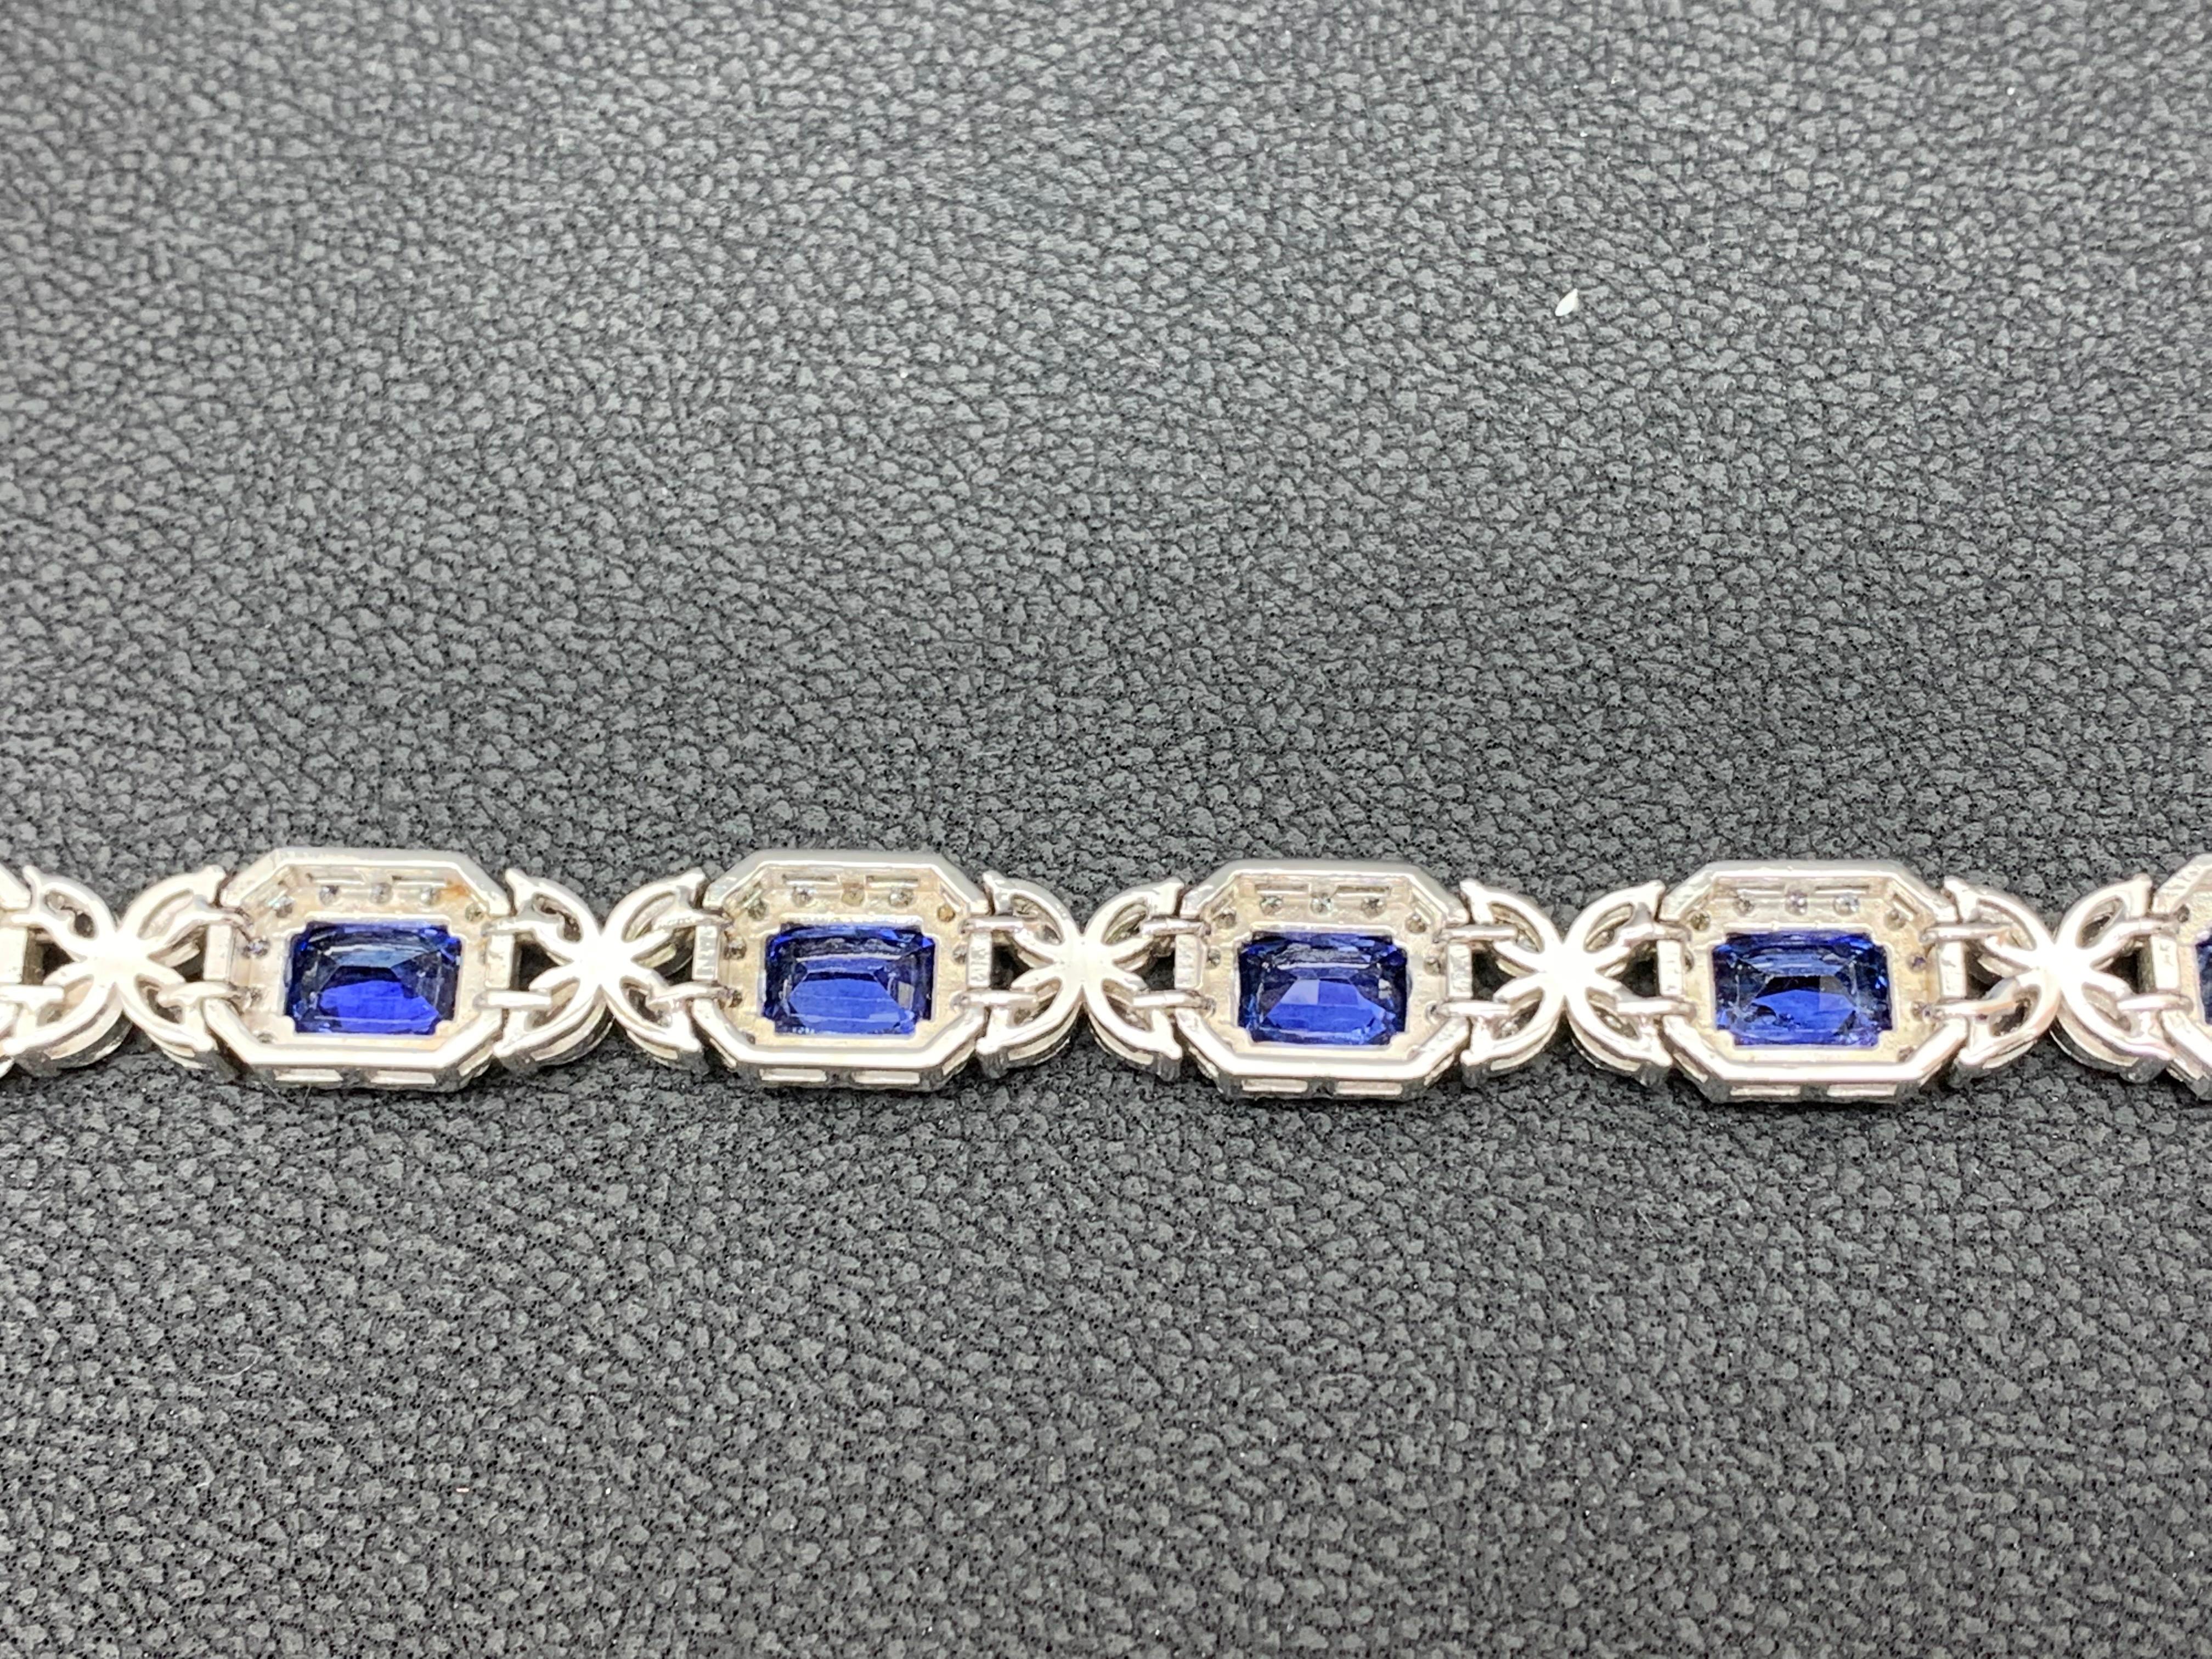 10.47 Carat Cushion cut Sapphire and Diamond Bracelet in 14K White Gold For Sale 1